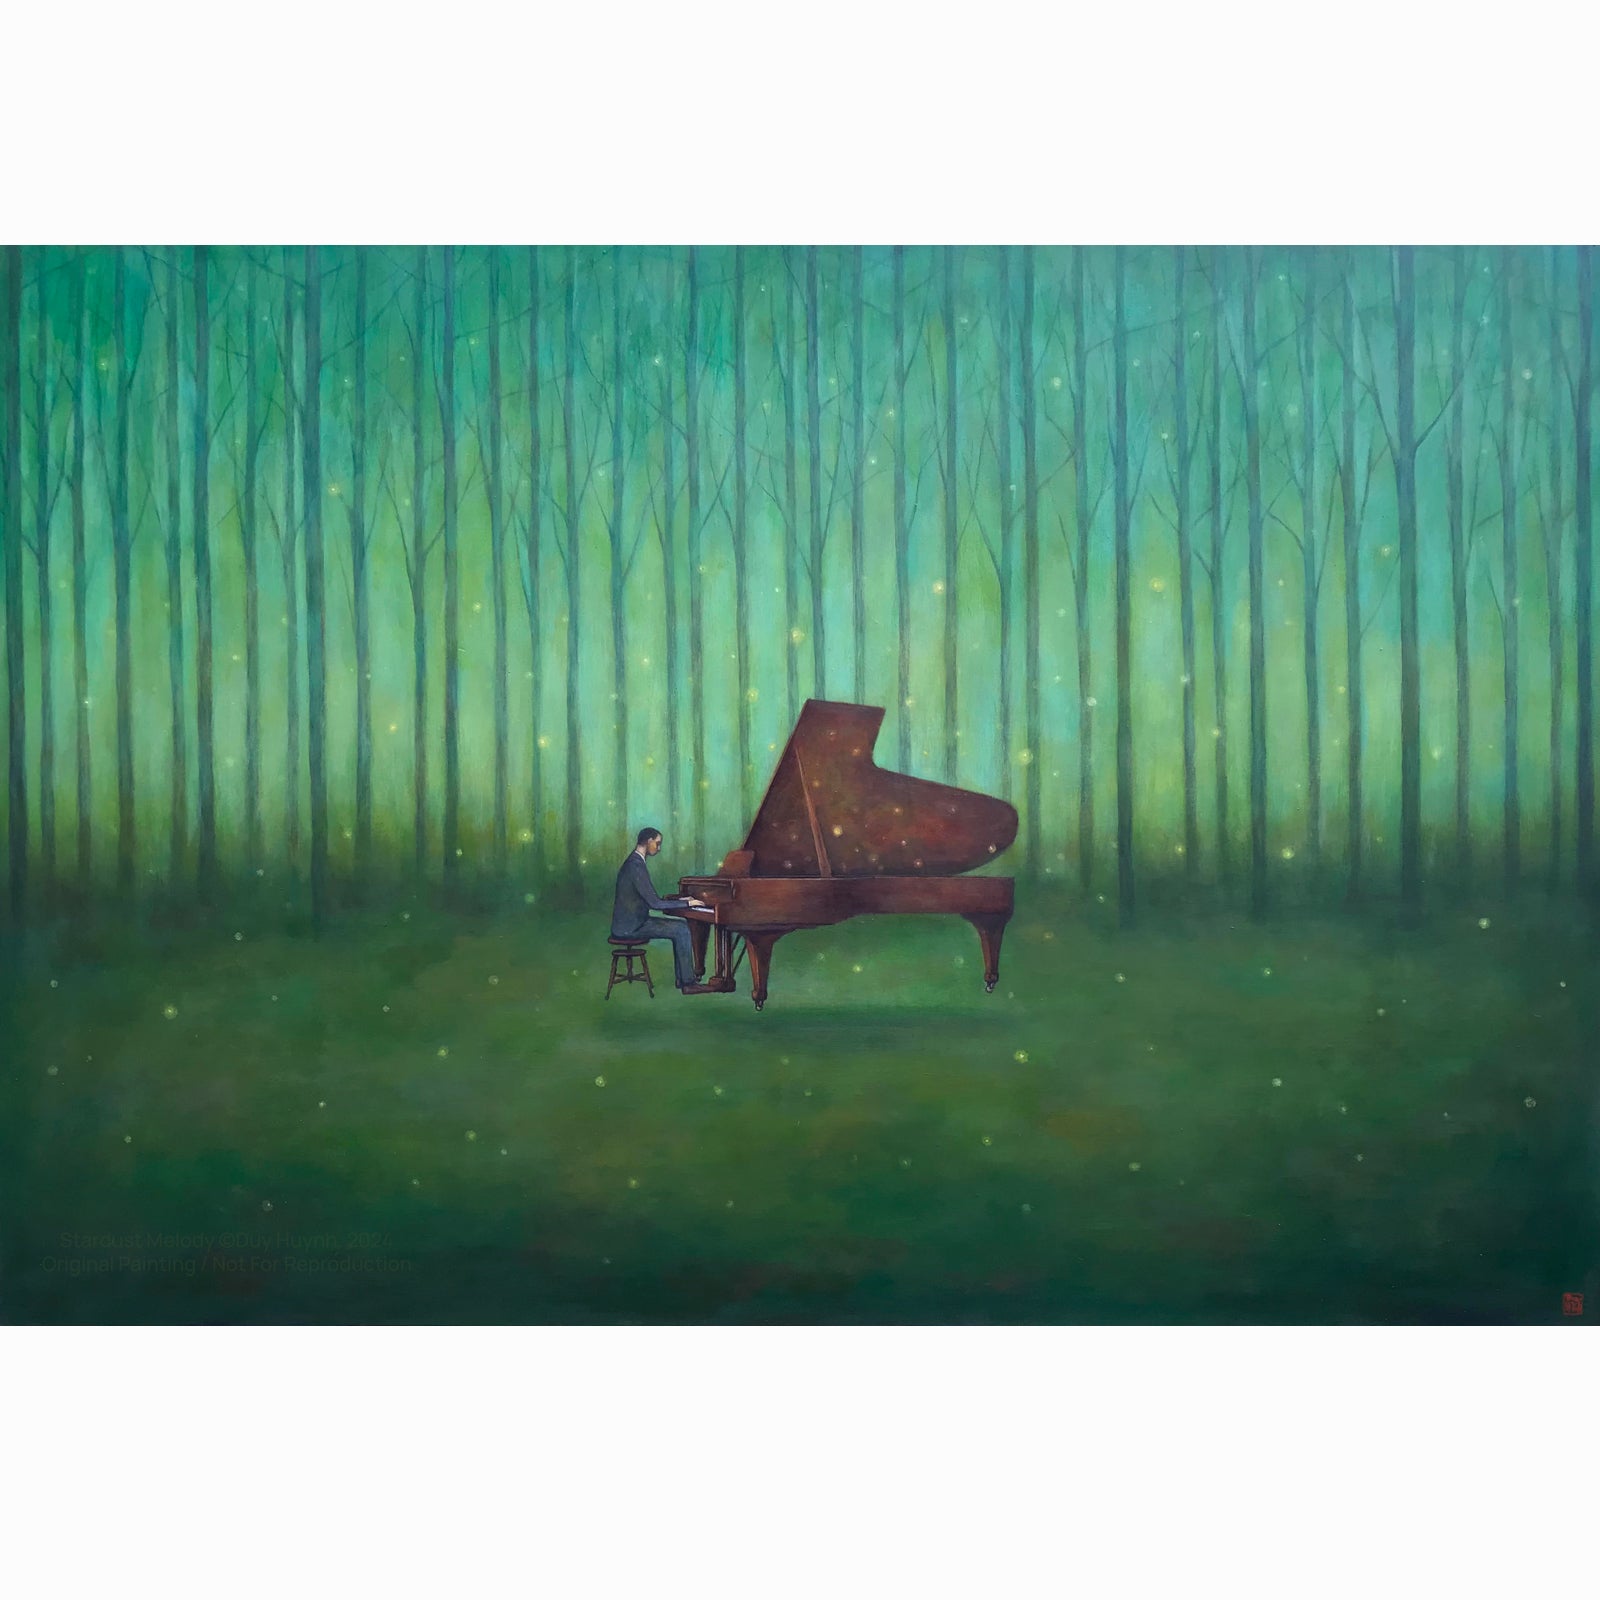 Artist Duy Huynh 's painting called "Stardust Melody". A man plays a floating piano in the forest surrounded by fireflies. Available at Lark & Key, Charlotte NC.